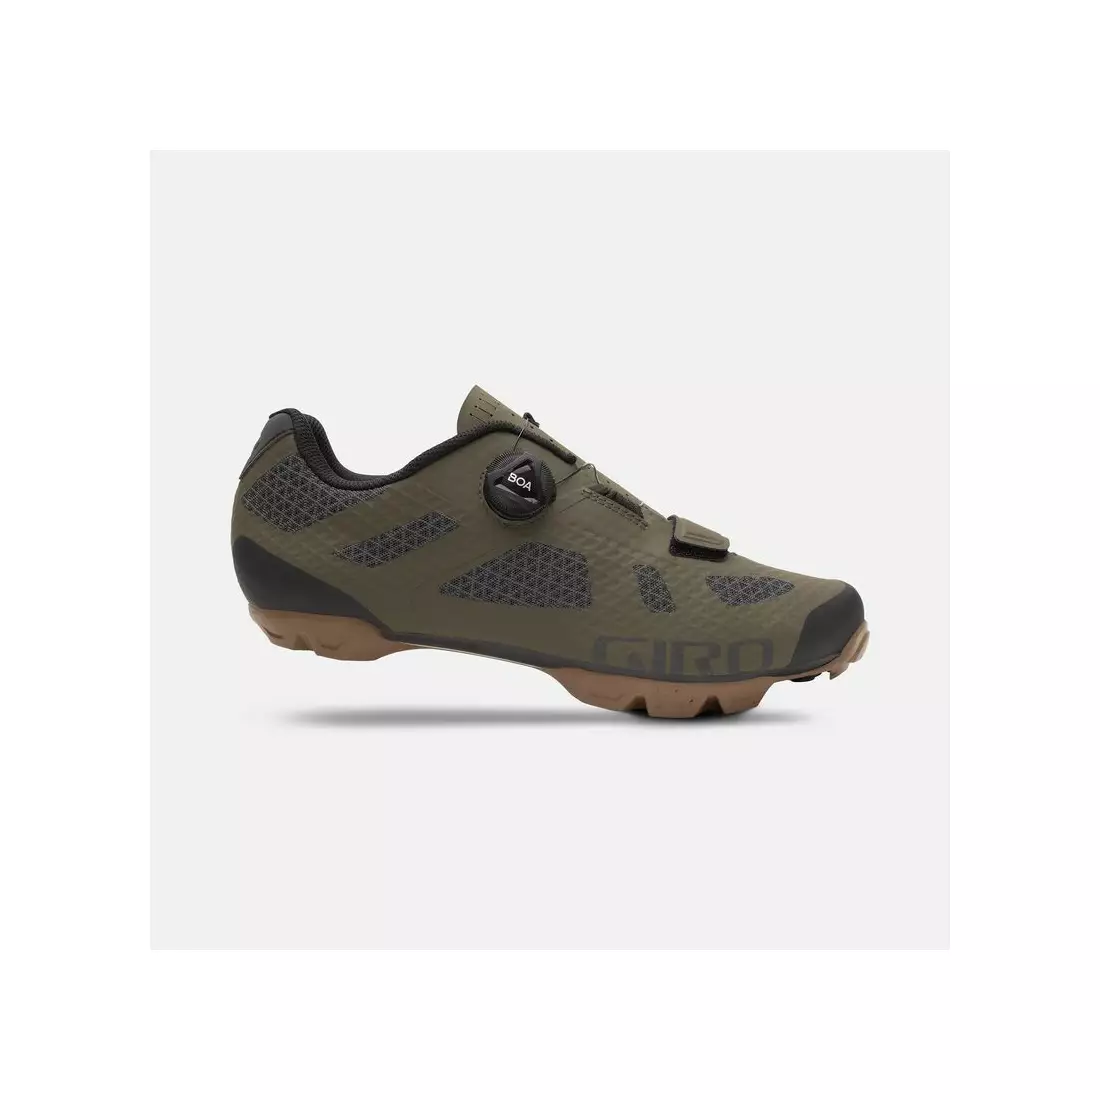 GIRO men's bicycle shoes RINCON olive gum GR-7122983